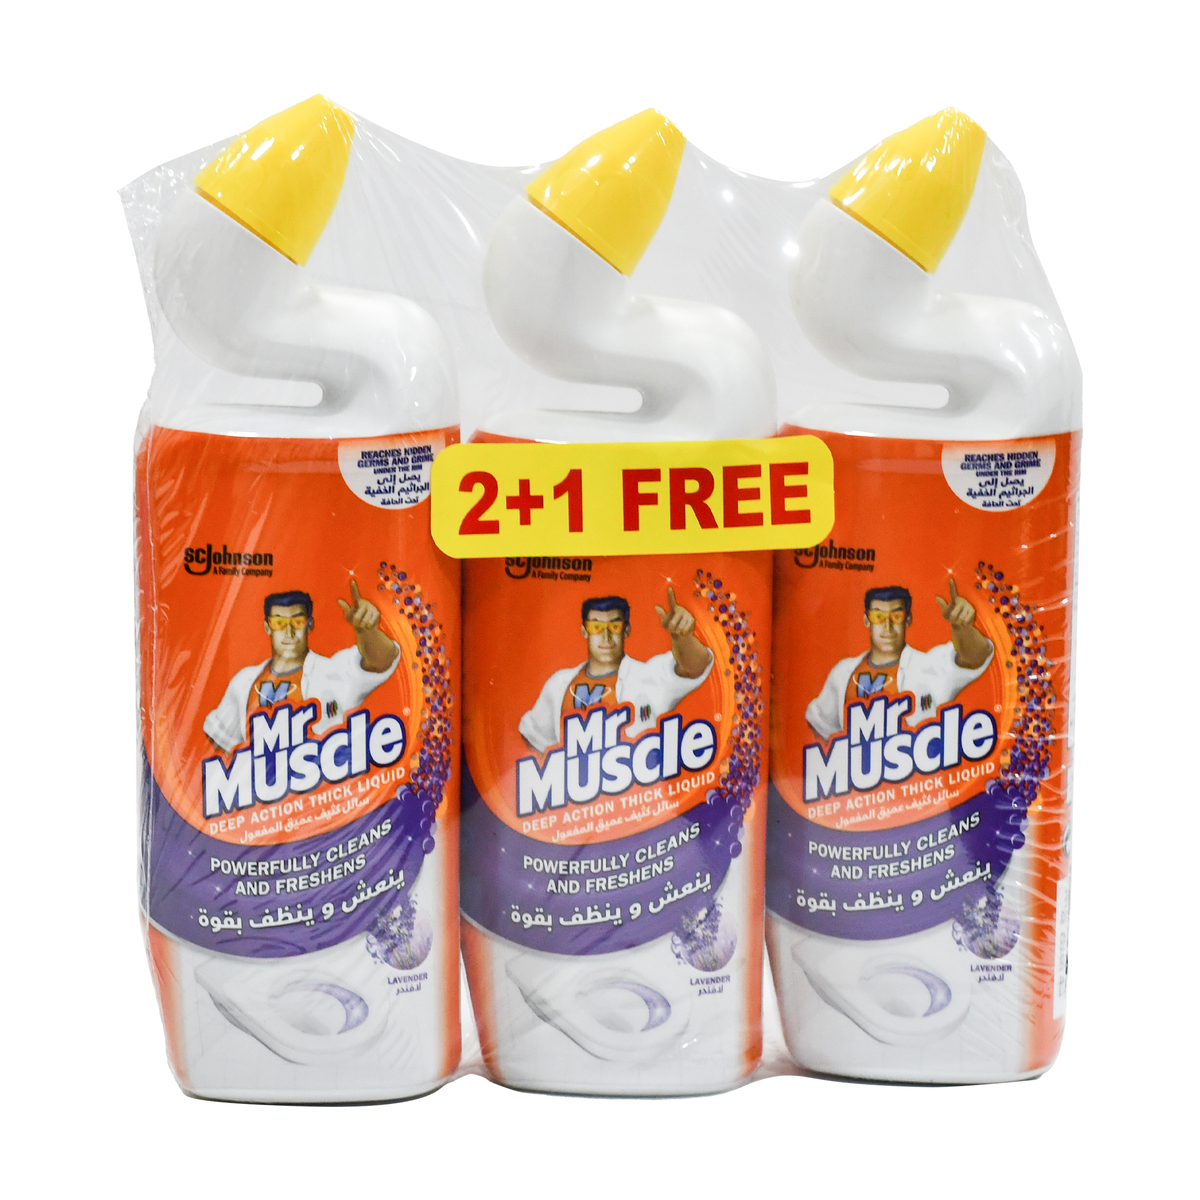 Mr. Muscle Deep Action Toilet Cleaner Lavender 750 ml 2+1 Free